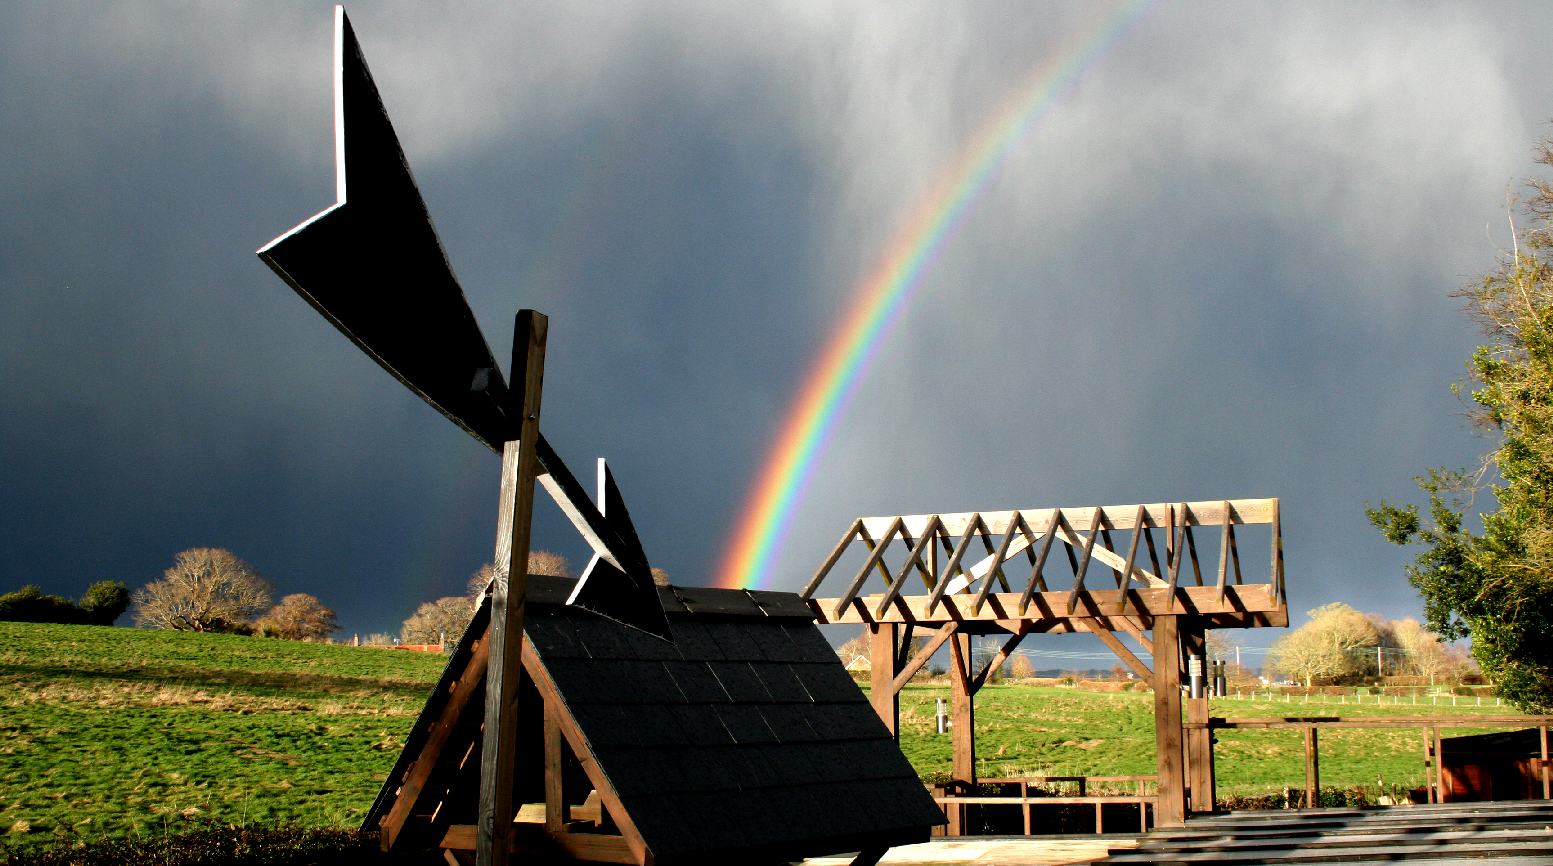 Rainbows are a sign from above given to Noah on leaving the Ark